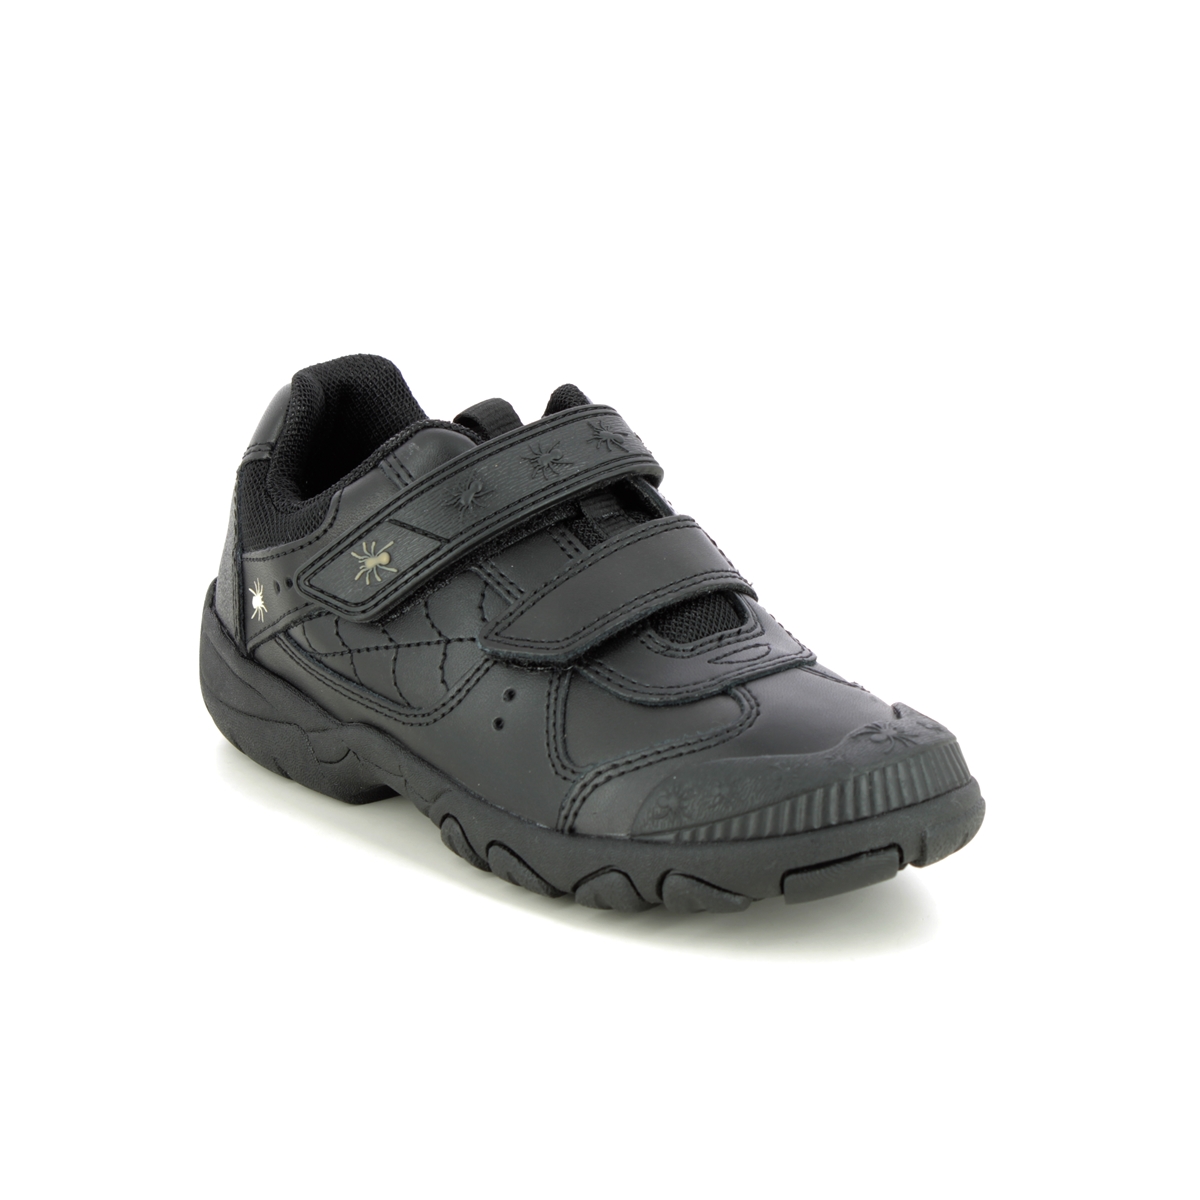 Start Rite - Tarantula In Black Leather 2272-76F In Size 11.5 In Plain Black Leather For School Boys Shoes  In Black Leather For kids